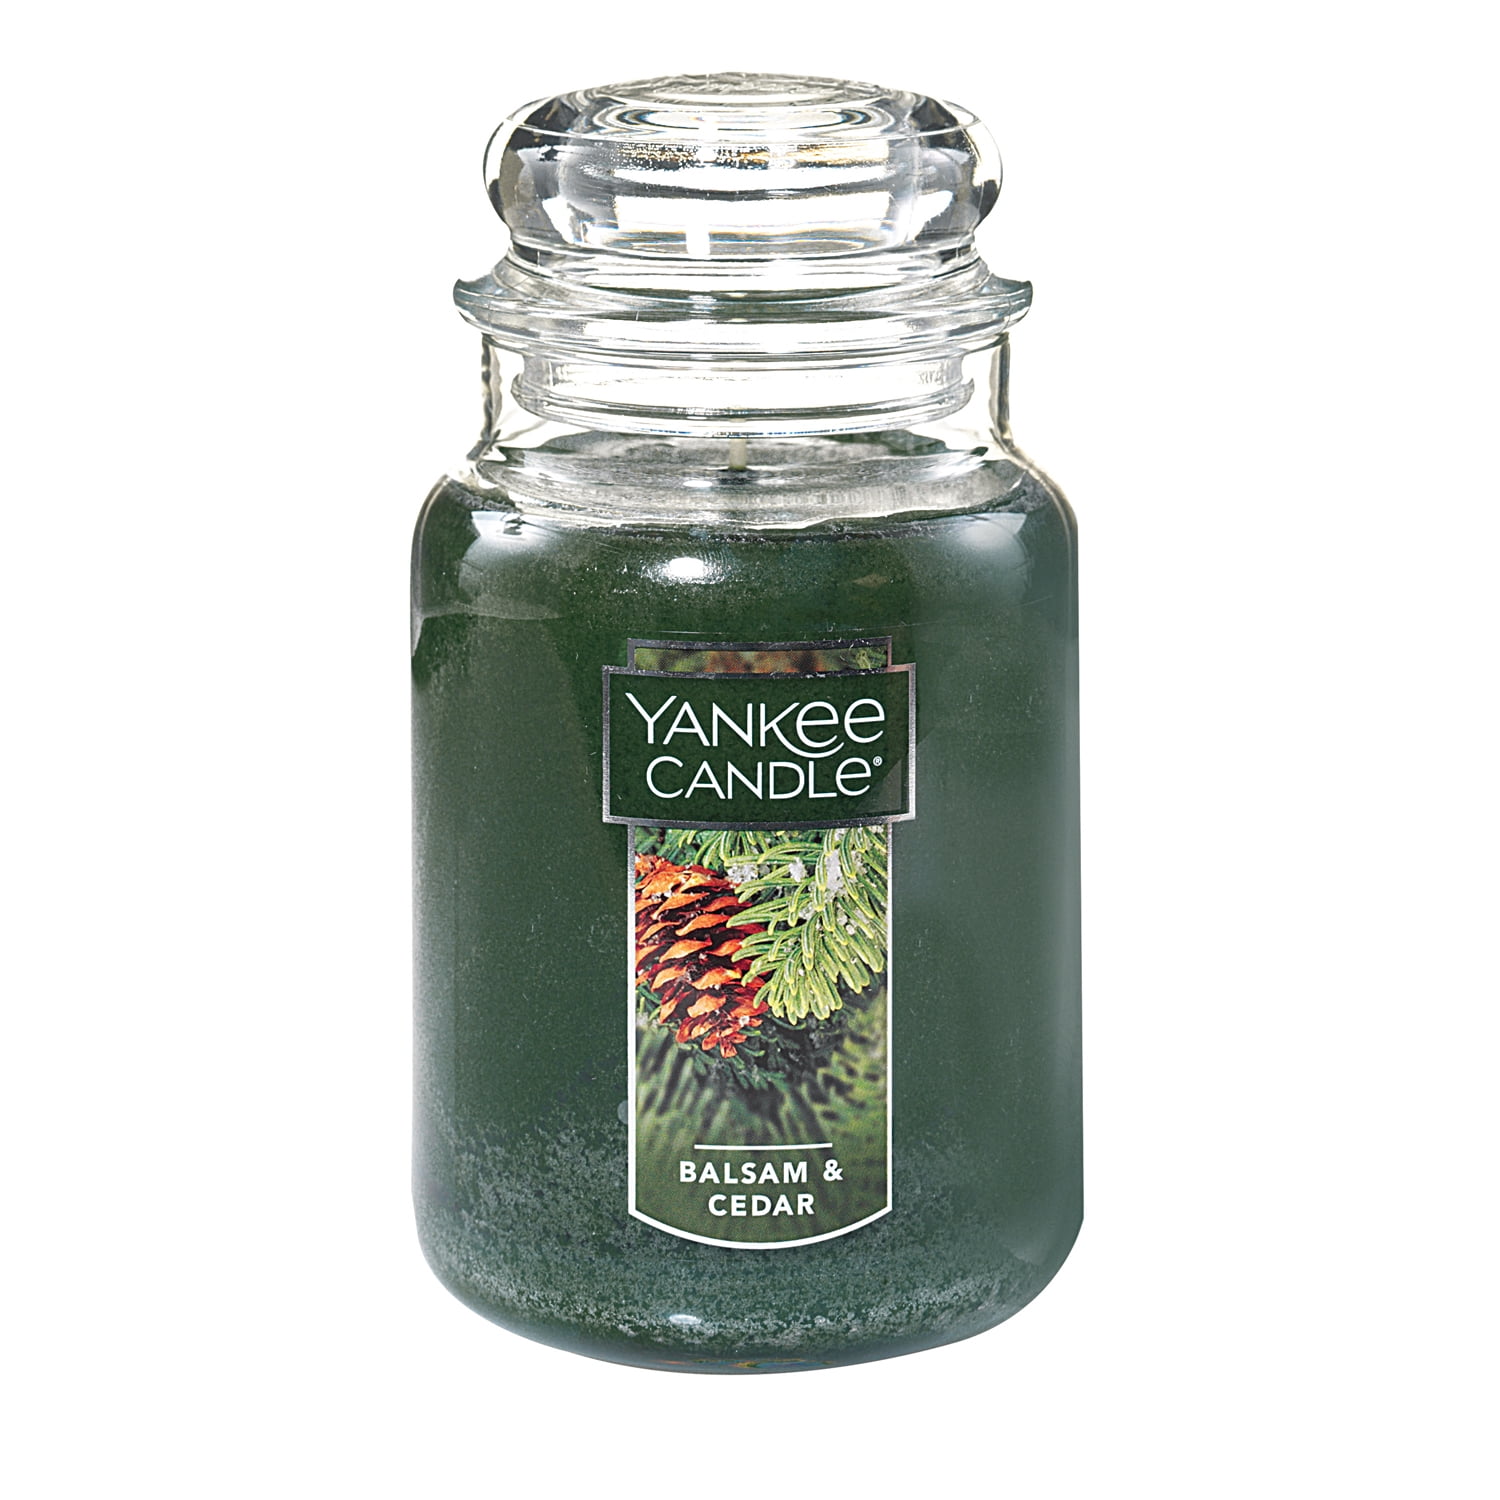 U Pick Scent USA New YANKEE CANDLE Large Jar Candle 22 oz Many Scents 